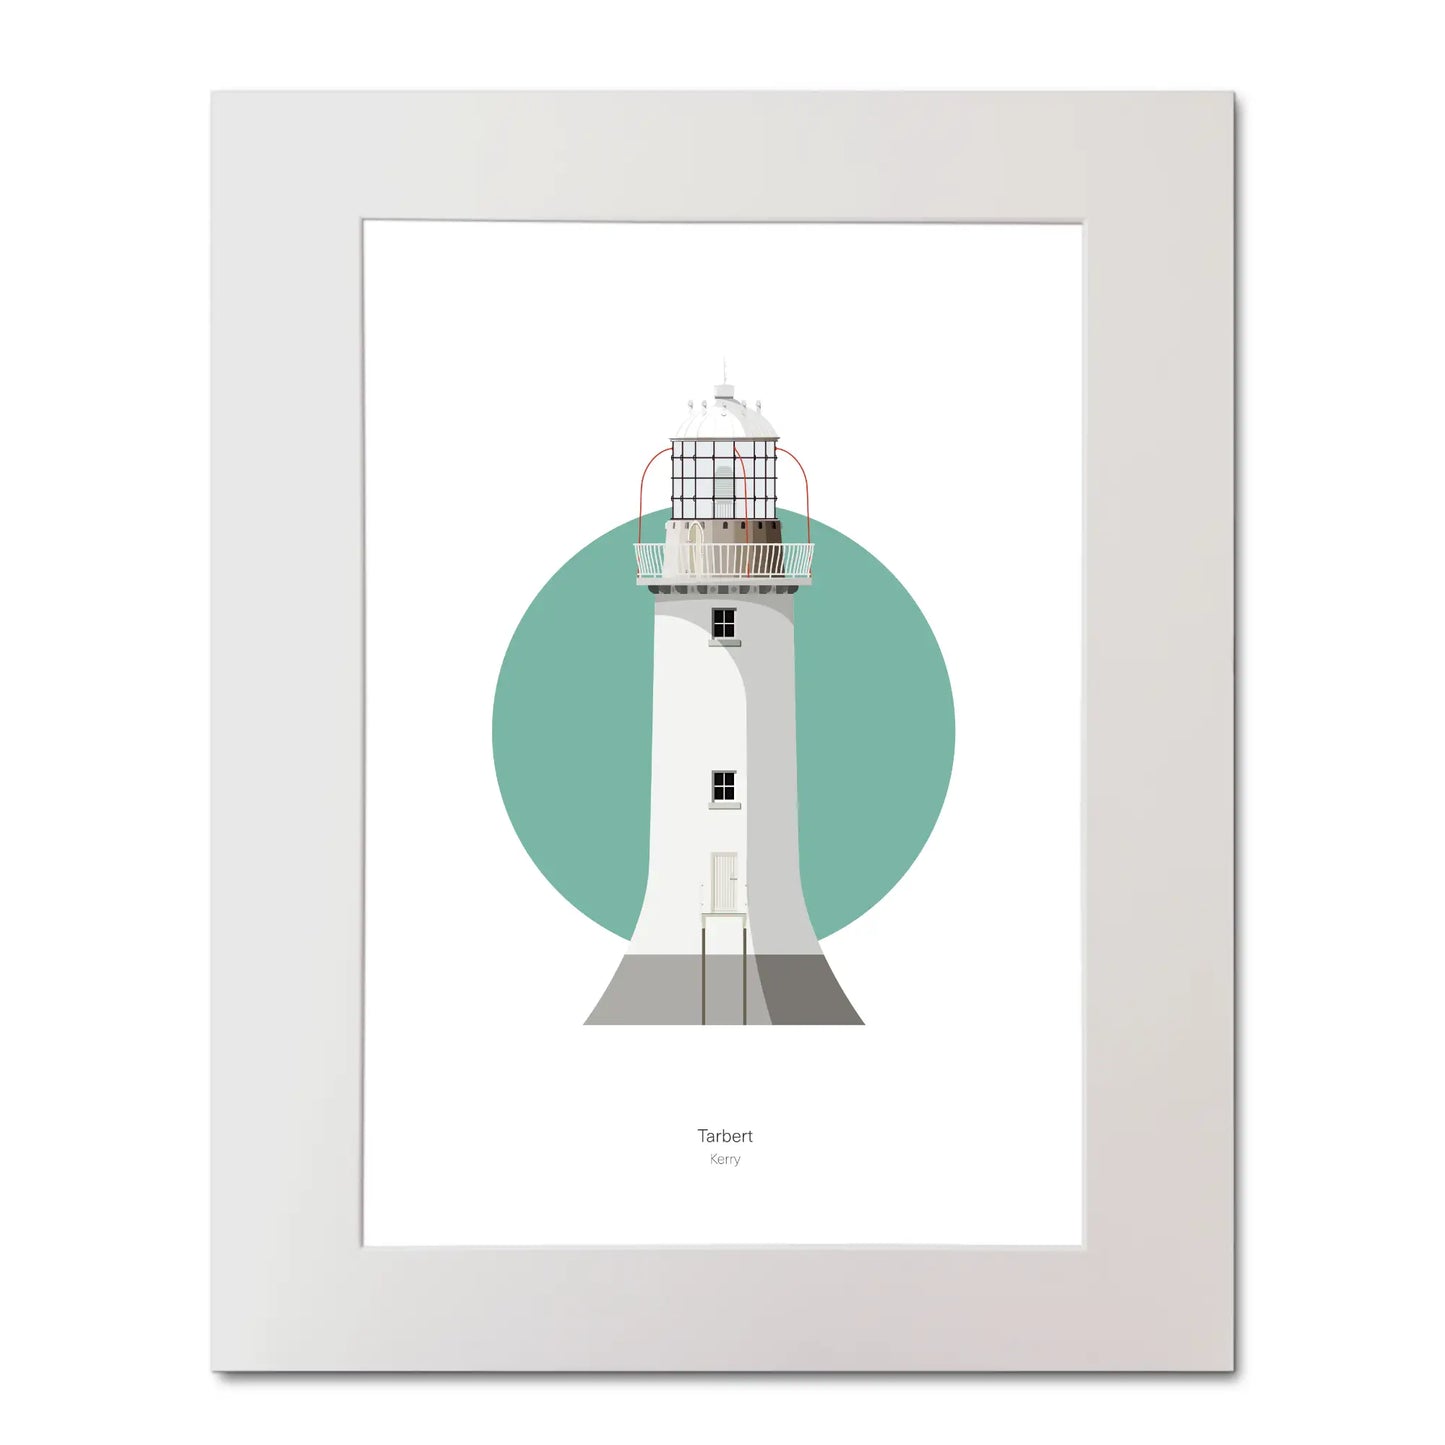 Contemporary illustration of Tarbert lighthouse on a white background inside light blue square, mounted and measuring 40x50cm.